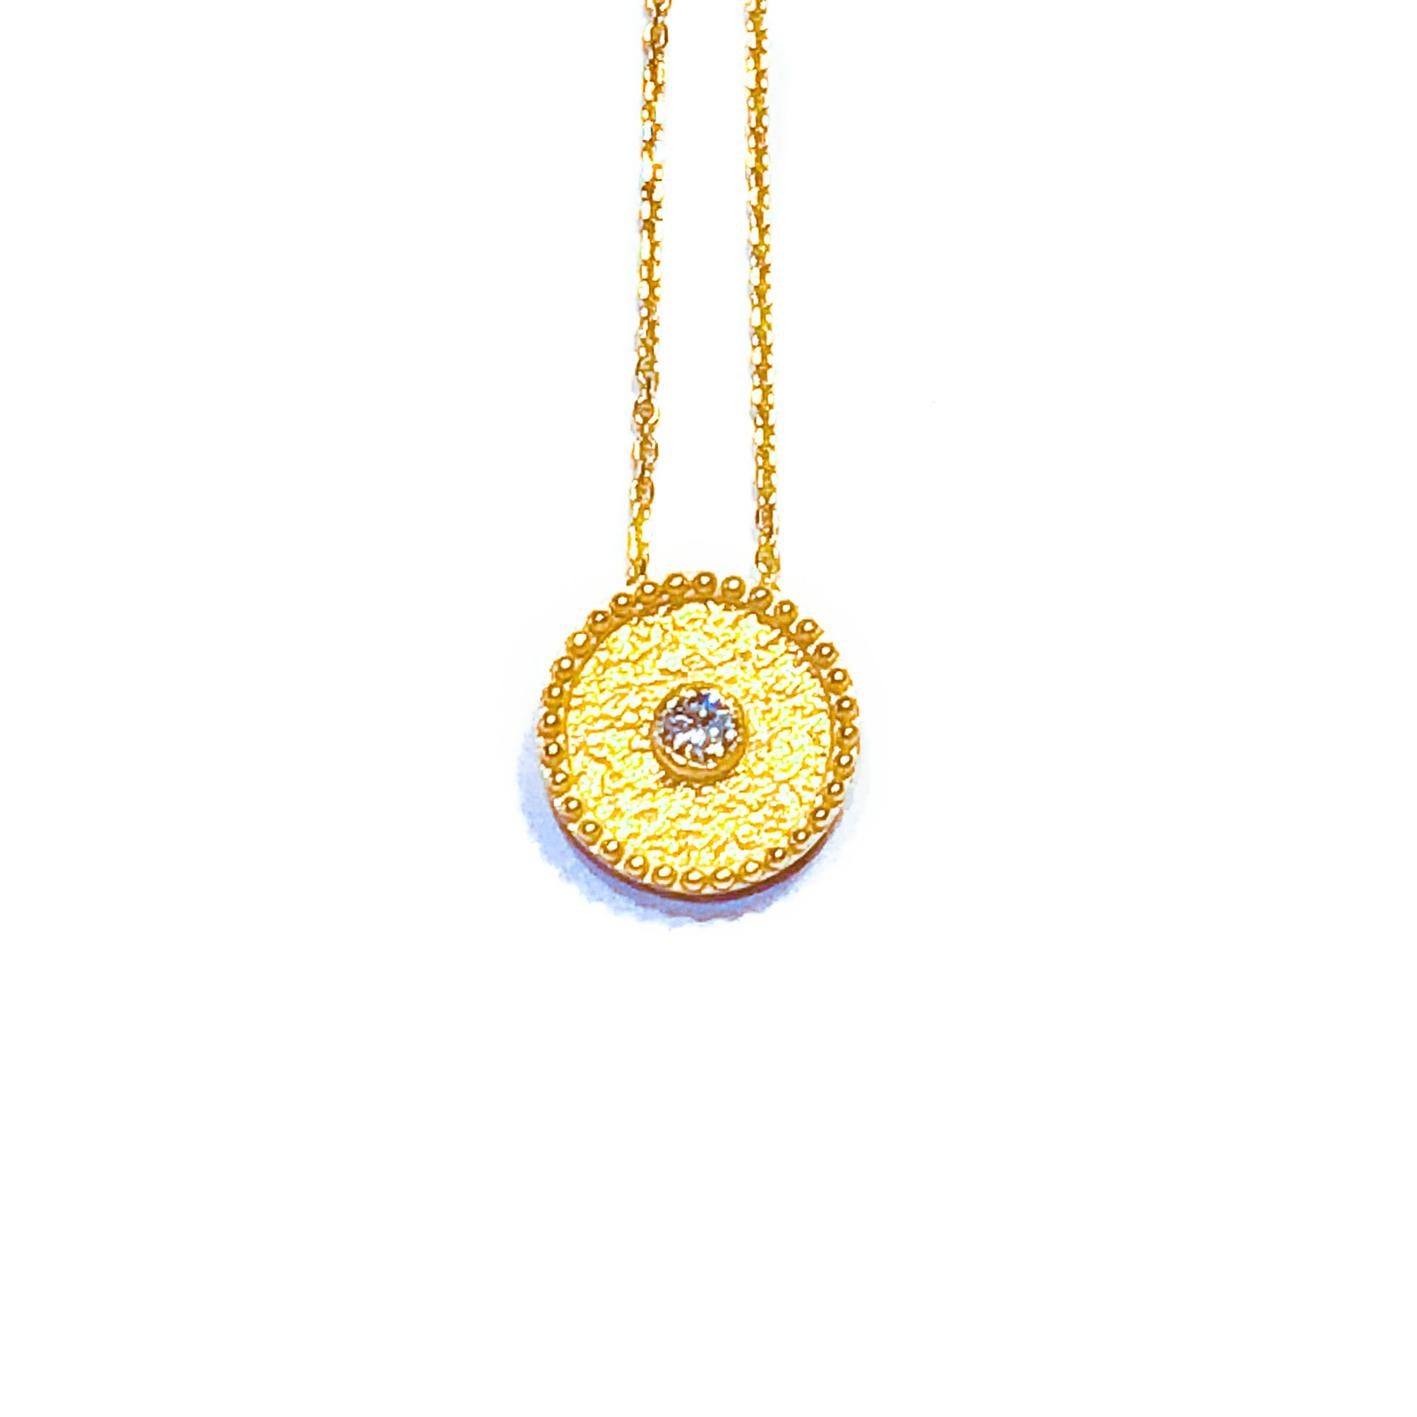 This S.Georgios designer solitaire pendant is all handmade from solid 18 Karat Yellow Gold and is microscopically decorated with granulation work all the way around. The background of the gorgeous pendant has a unique velvet look on the background